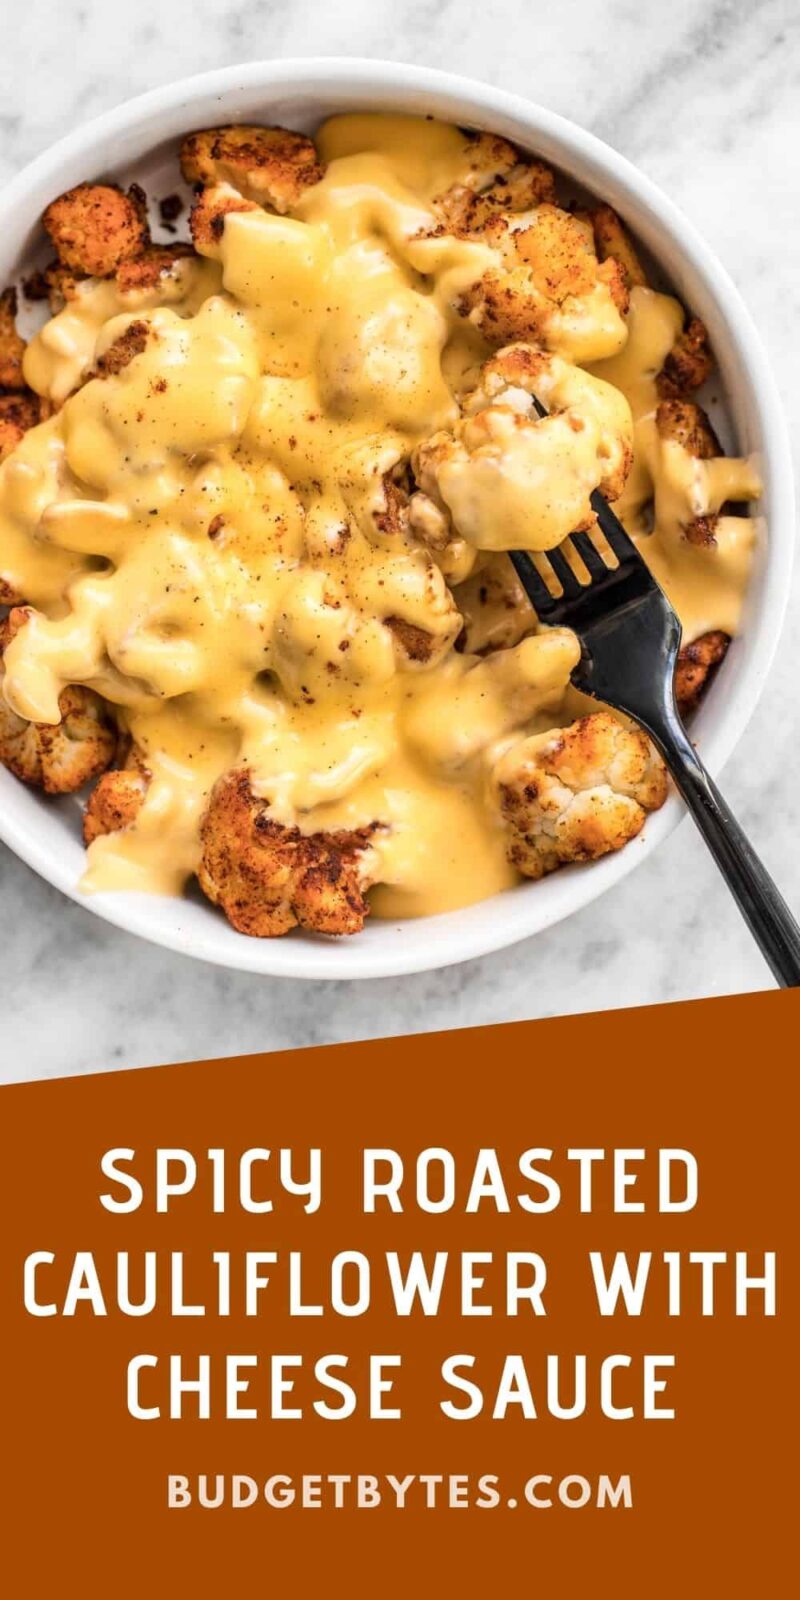 a bowl of roasted cauliflower covered in cheese sauce and a fork in the middle, title text at the bottom